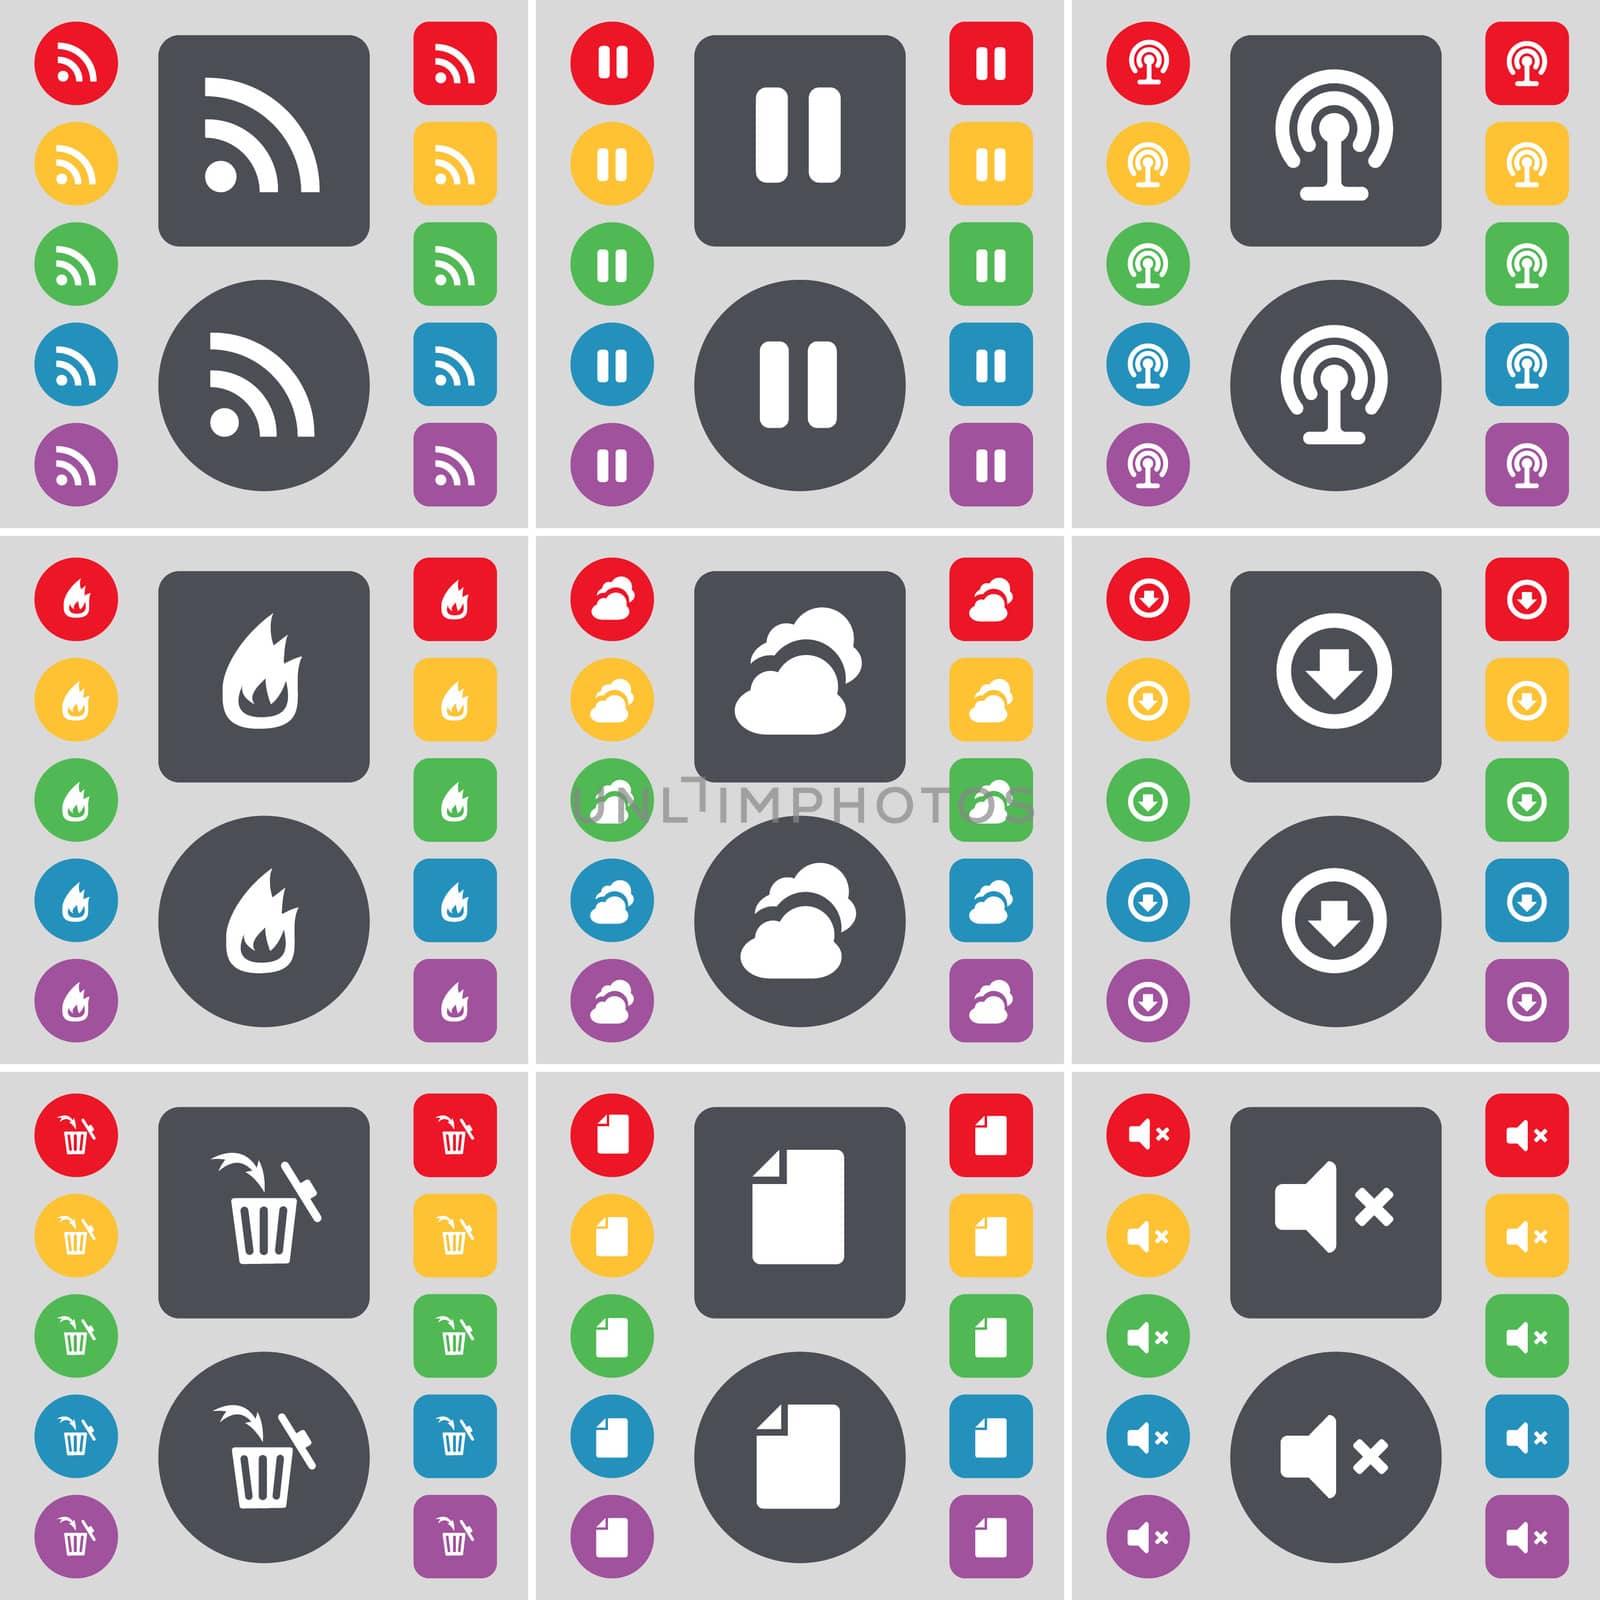 RSS, Pause, Wi-Fi, Fire, Cloud, Arrow down, Trash can, File, Mute icon symbol. A large set of flat, colored buttons for your design. illustration